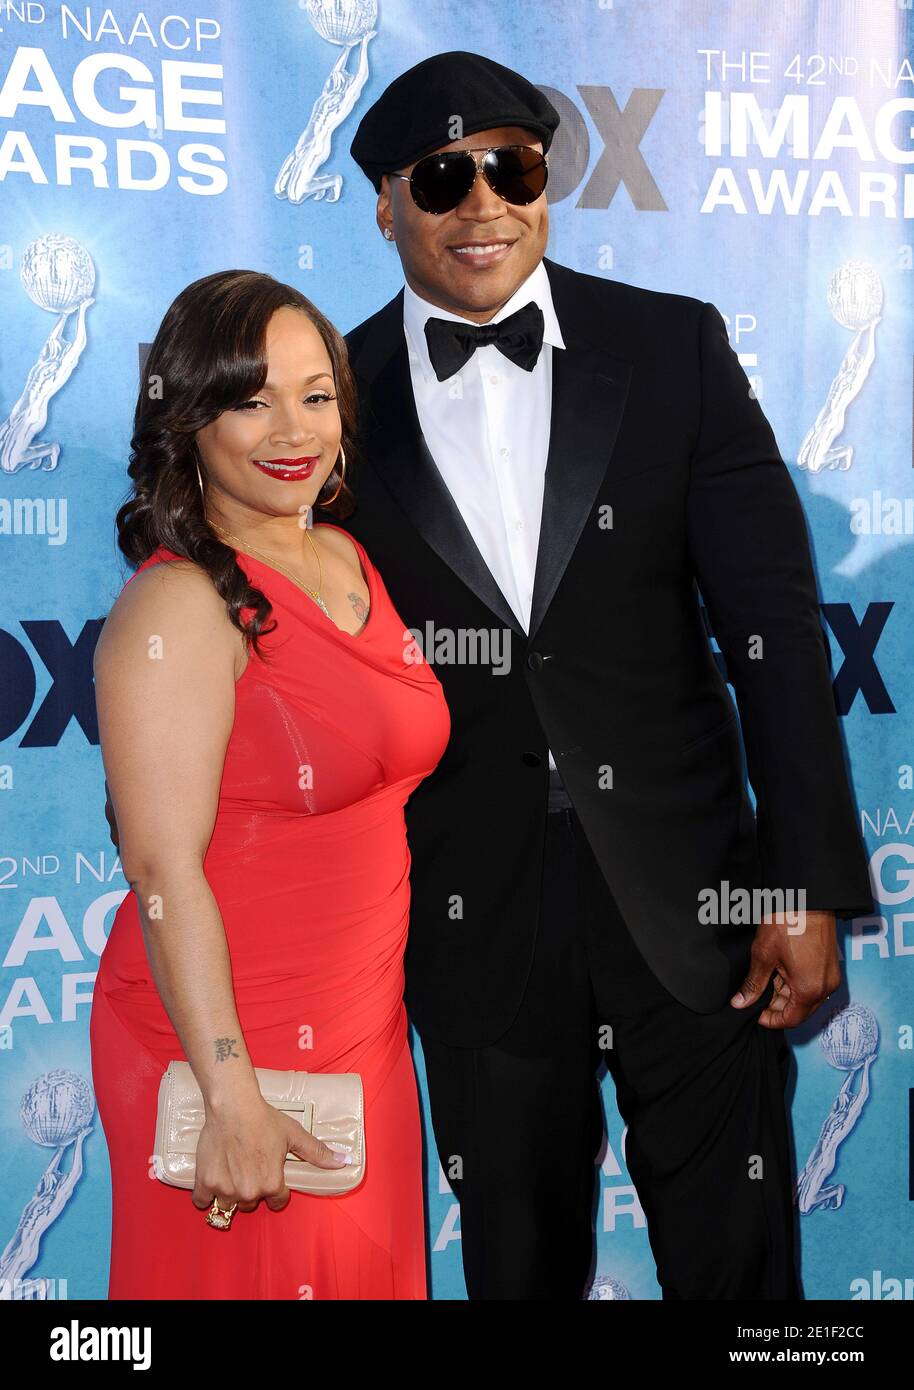 LL Cool J and Simone Johnson attend the 42nd NAACP Image Awards at the Shrine Auditorium in Los Angeles, CA, USA, on March 4, 2011. Photo by Lionel Hahn/ABACAPRESS.COM Stock Photo